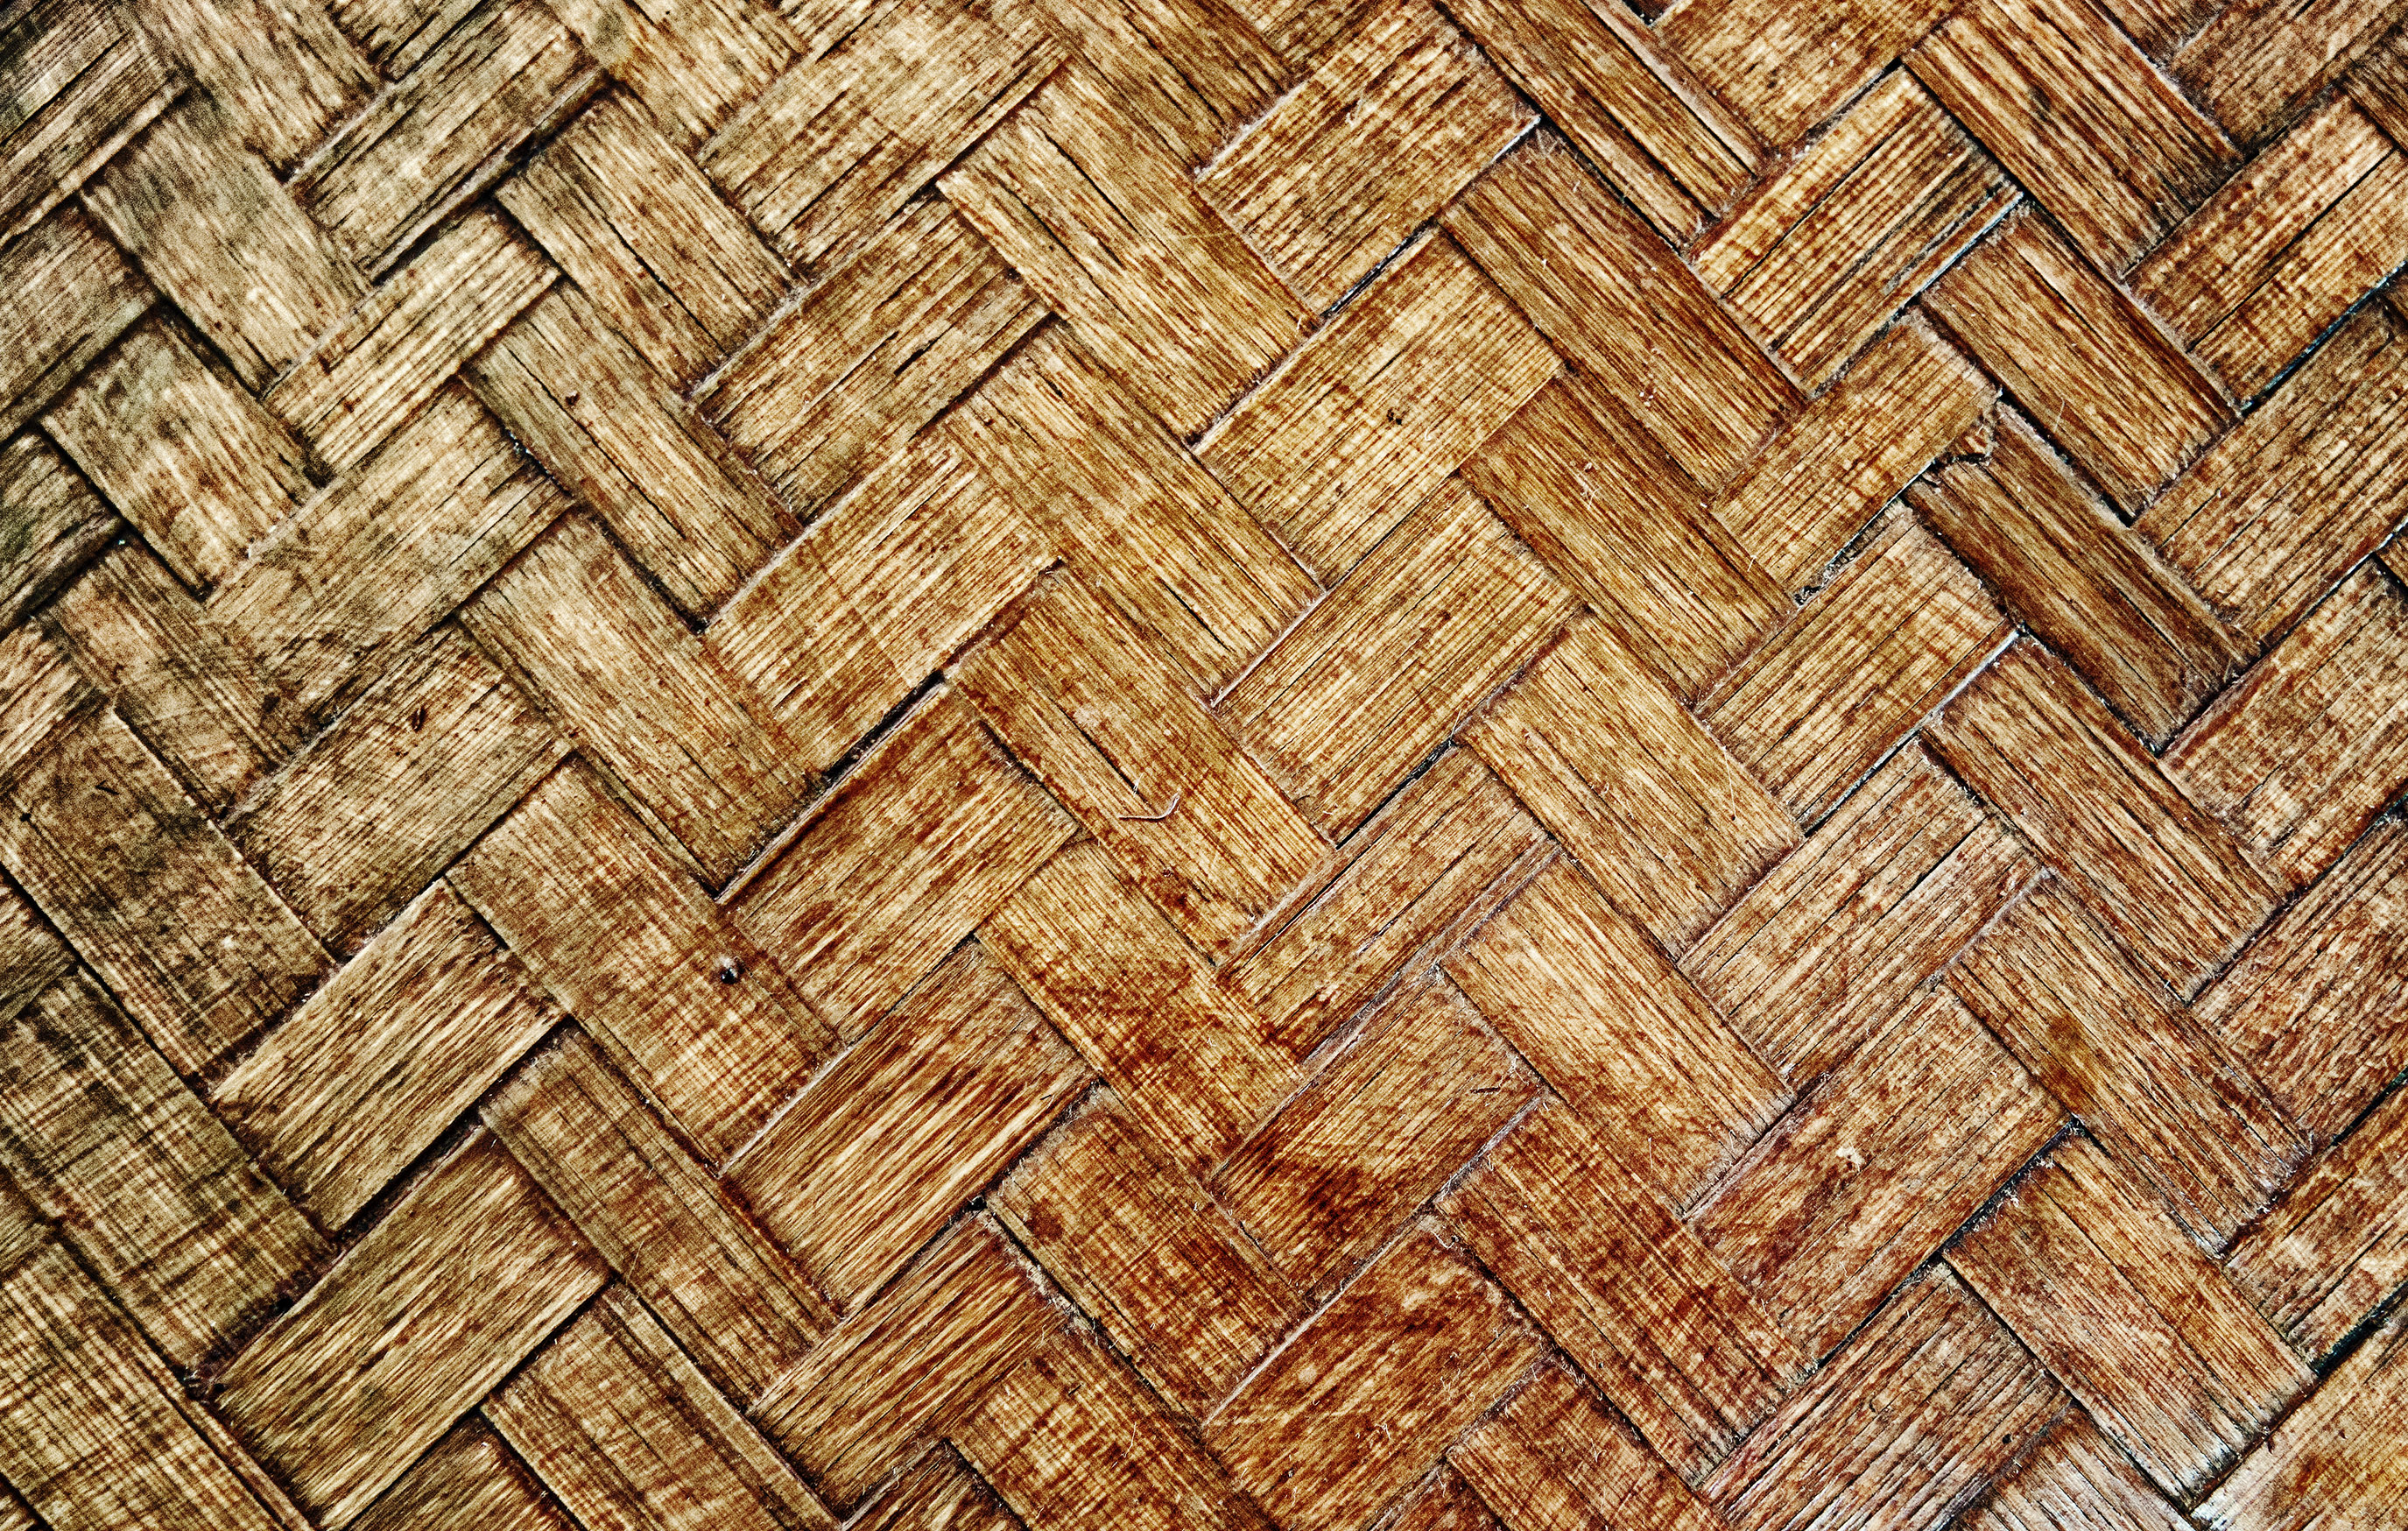 free background image of ﻿woven bamboo wooden floor texture | www ...